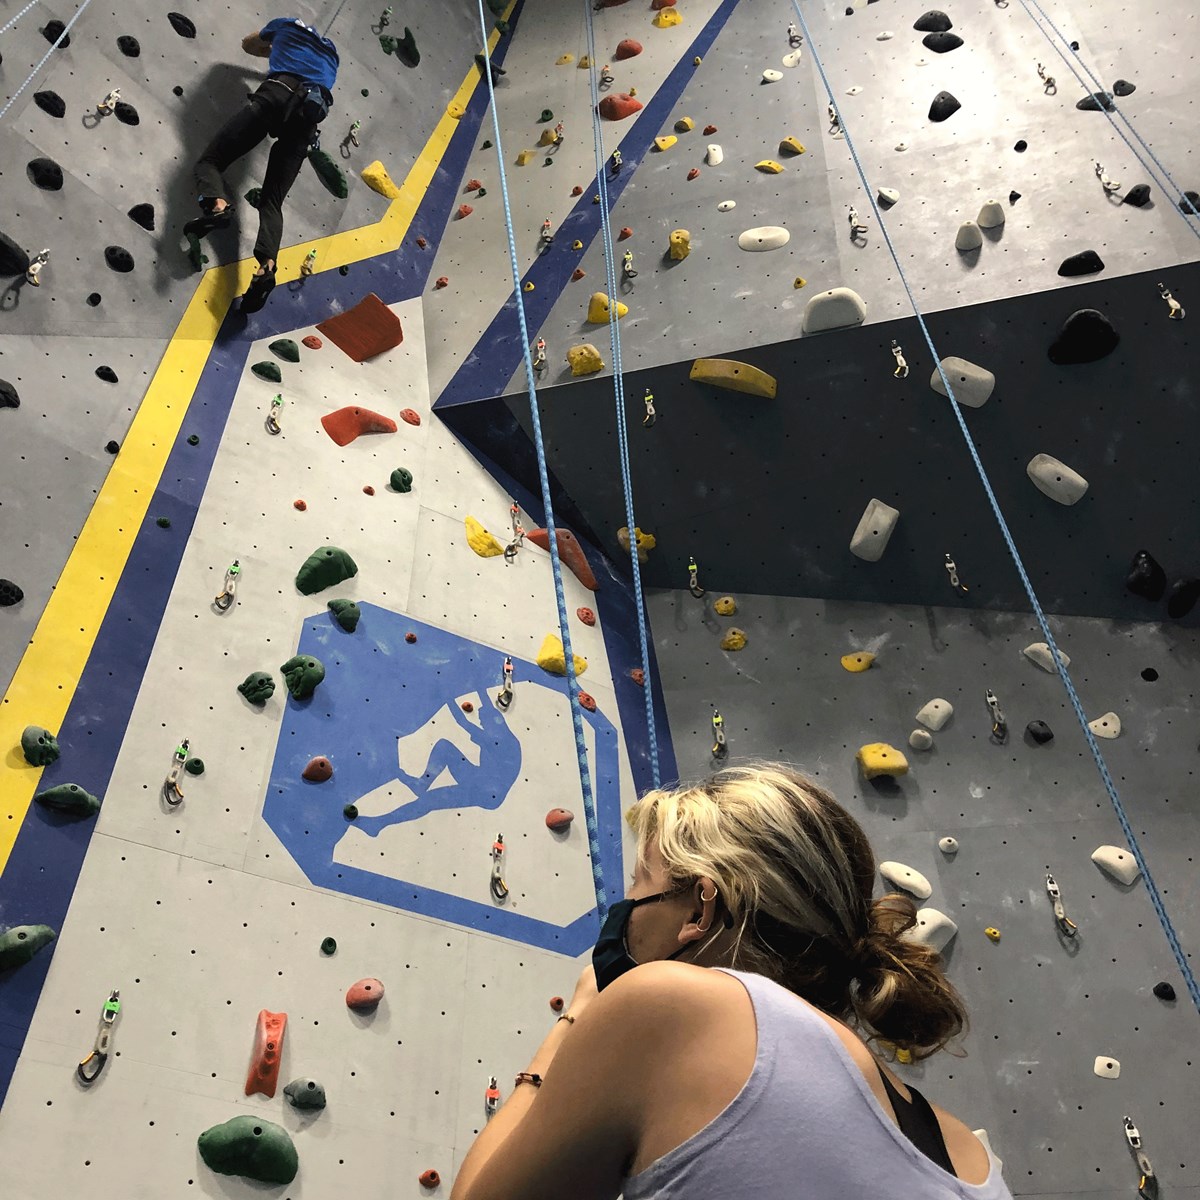 Woman assisting a man who is using a indoor rock climbing wall